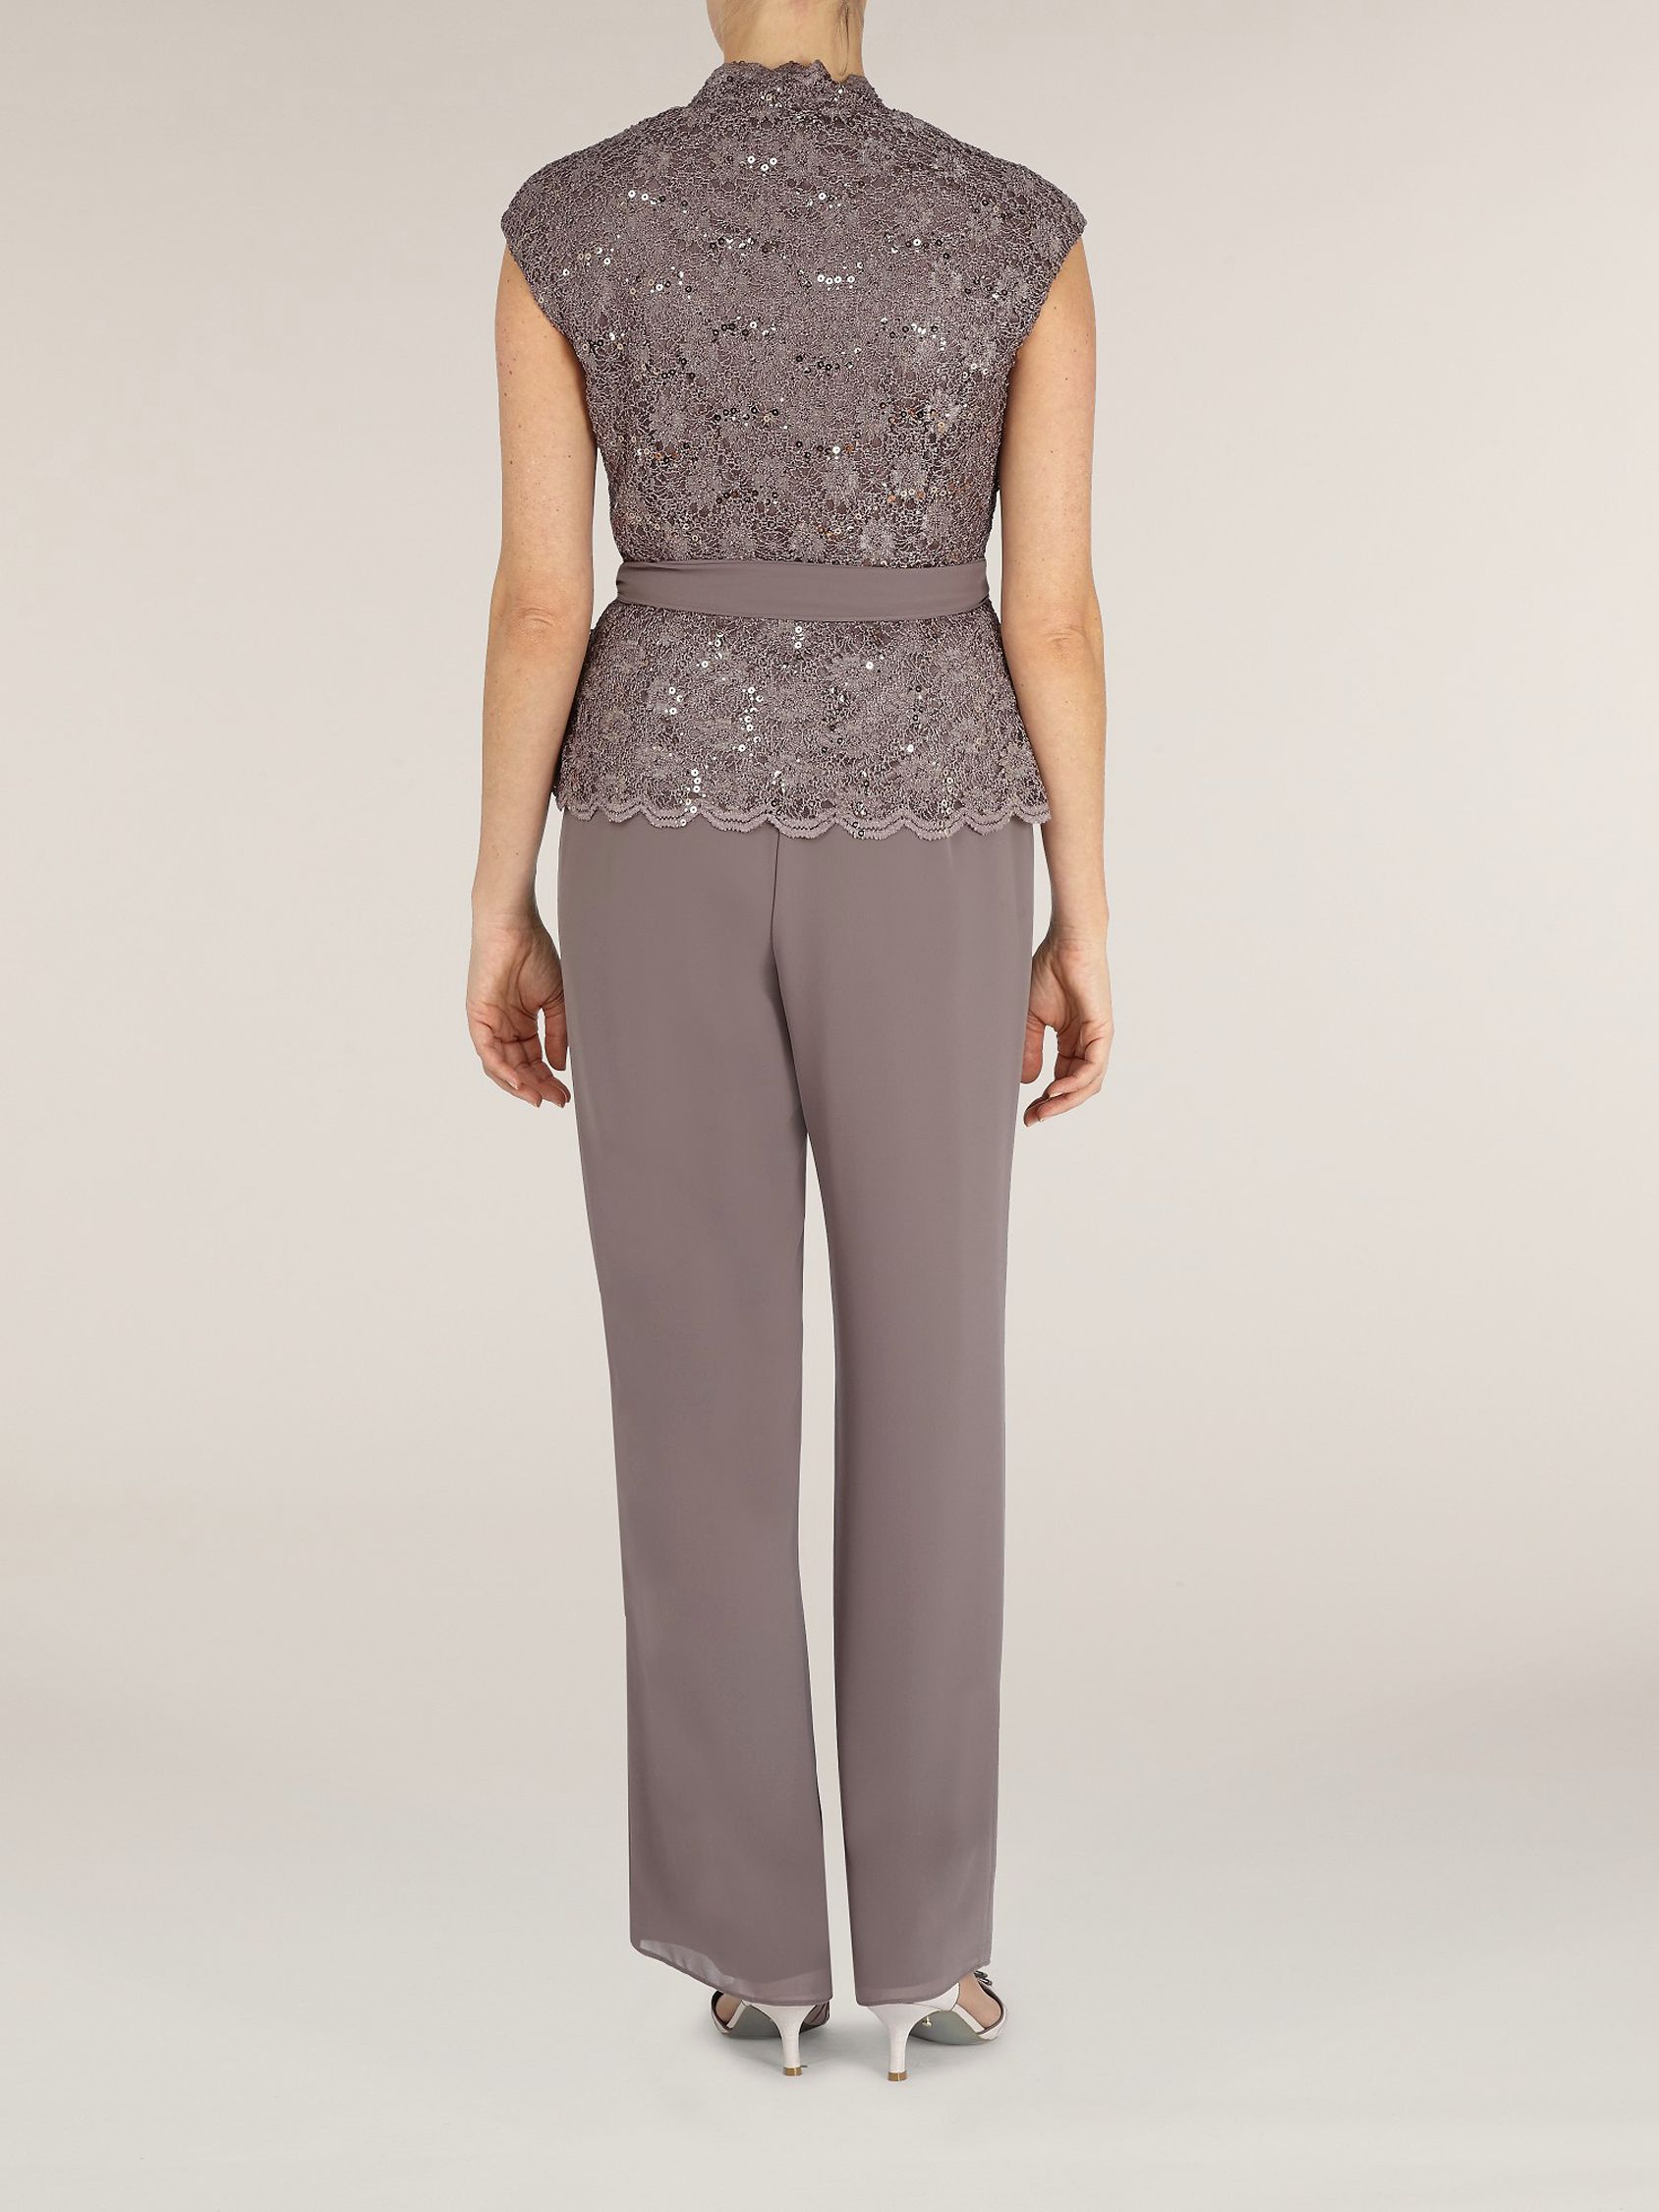 Jacques Vert Sequin & Lace Crossover Top, Brown at John Lewis & Partners